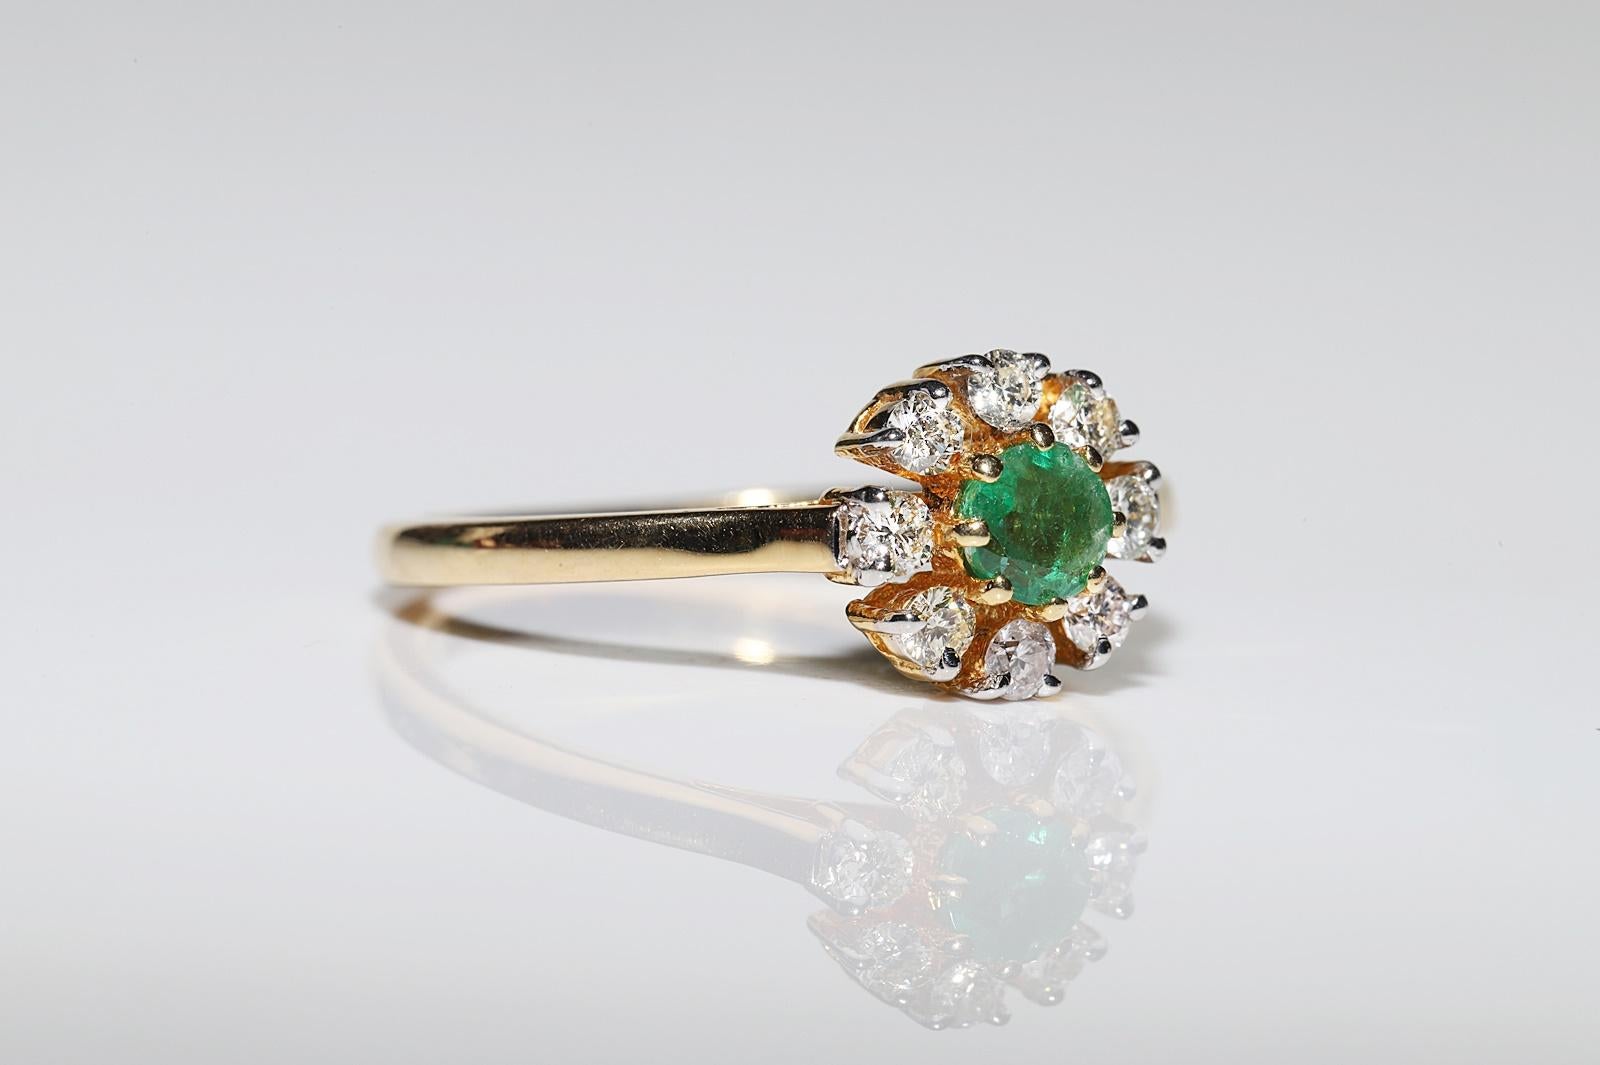 Vintage Circa 1980s 14k Gold Natural Diamond And Emerald Decorated Ring In Good Condition For Sale In Fatih/İstanbul, 34